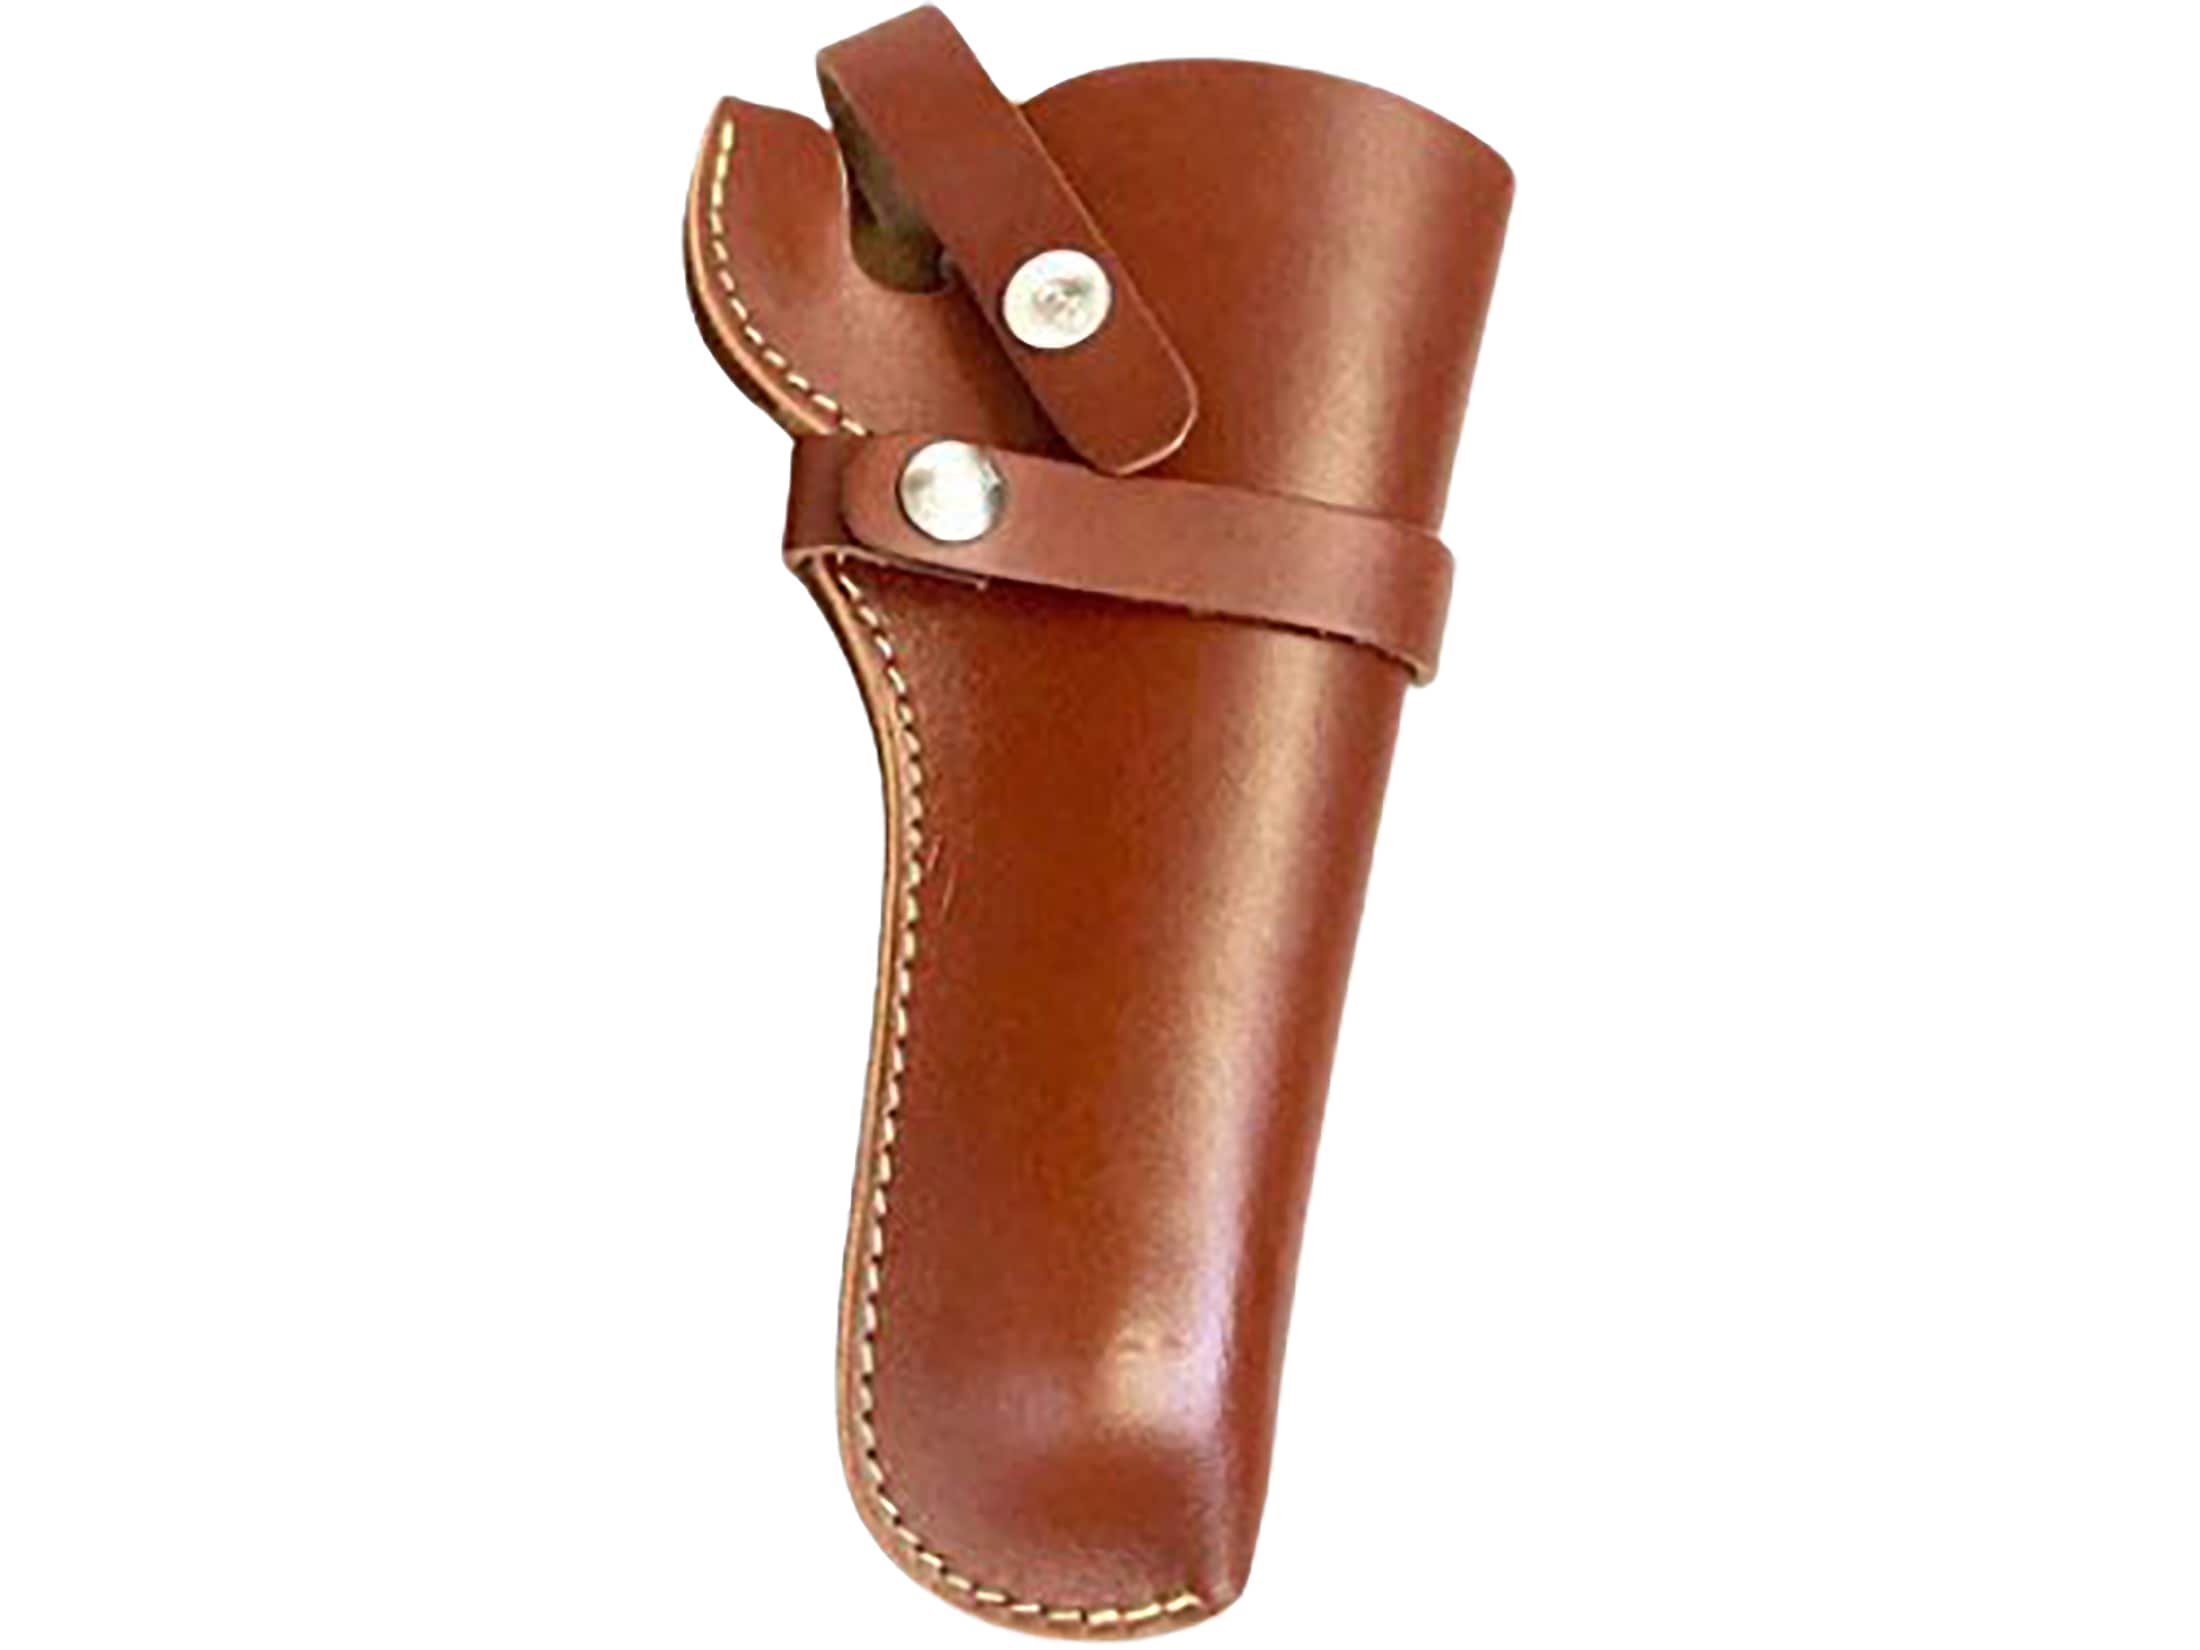 Hunter Holsters Suede Leather Holster for Revolvers 2" 3" Barrel RH IWB 1300-1 